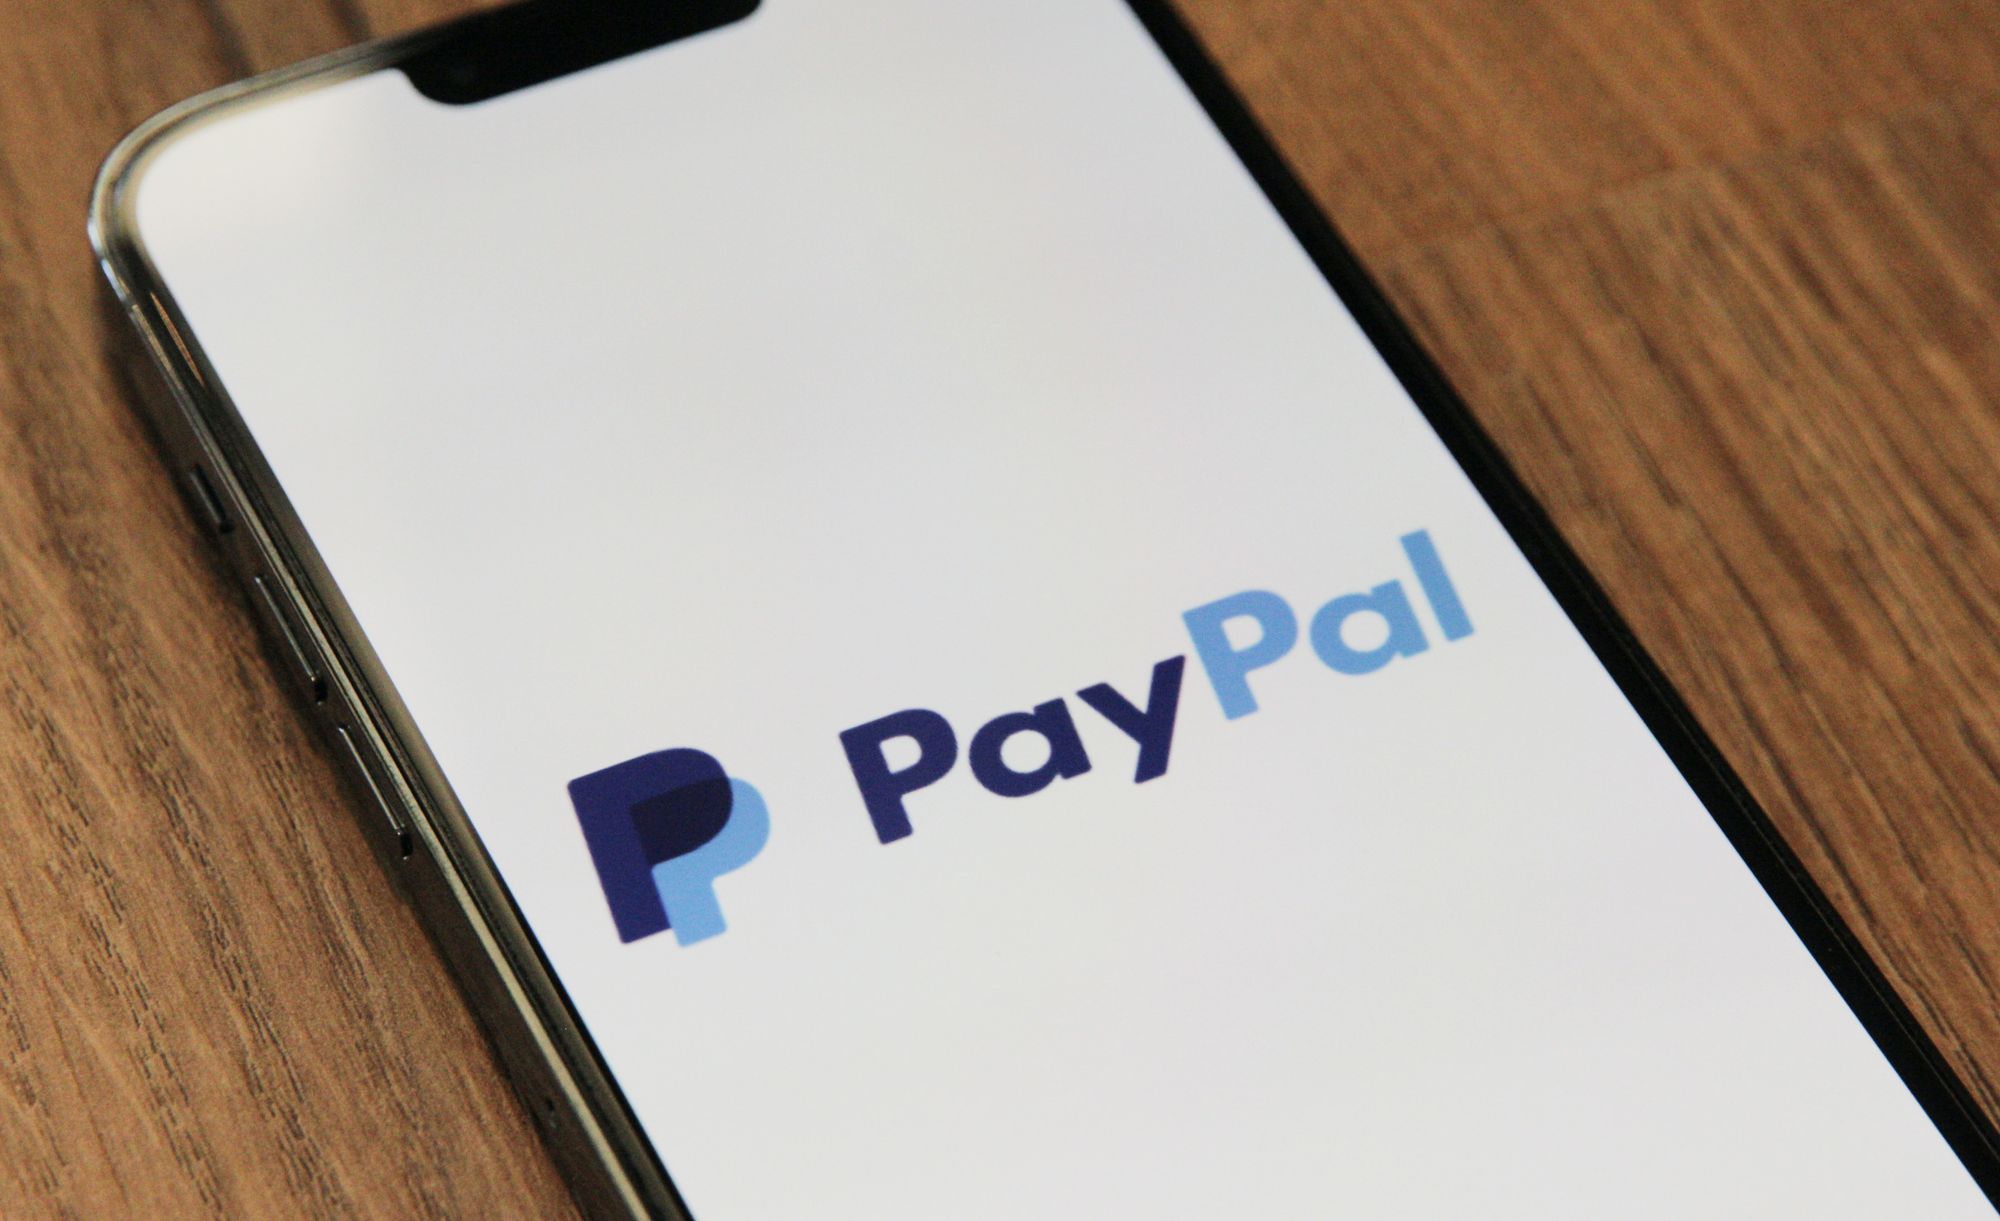 Paypal on a phone screen